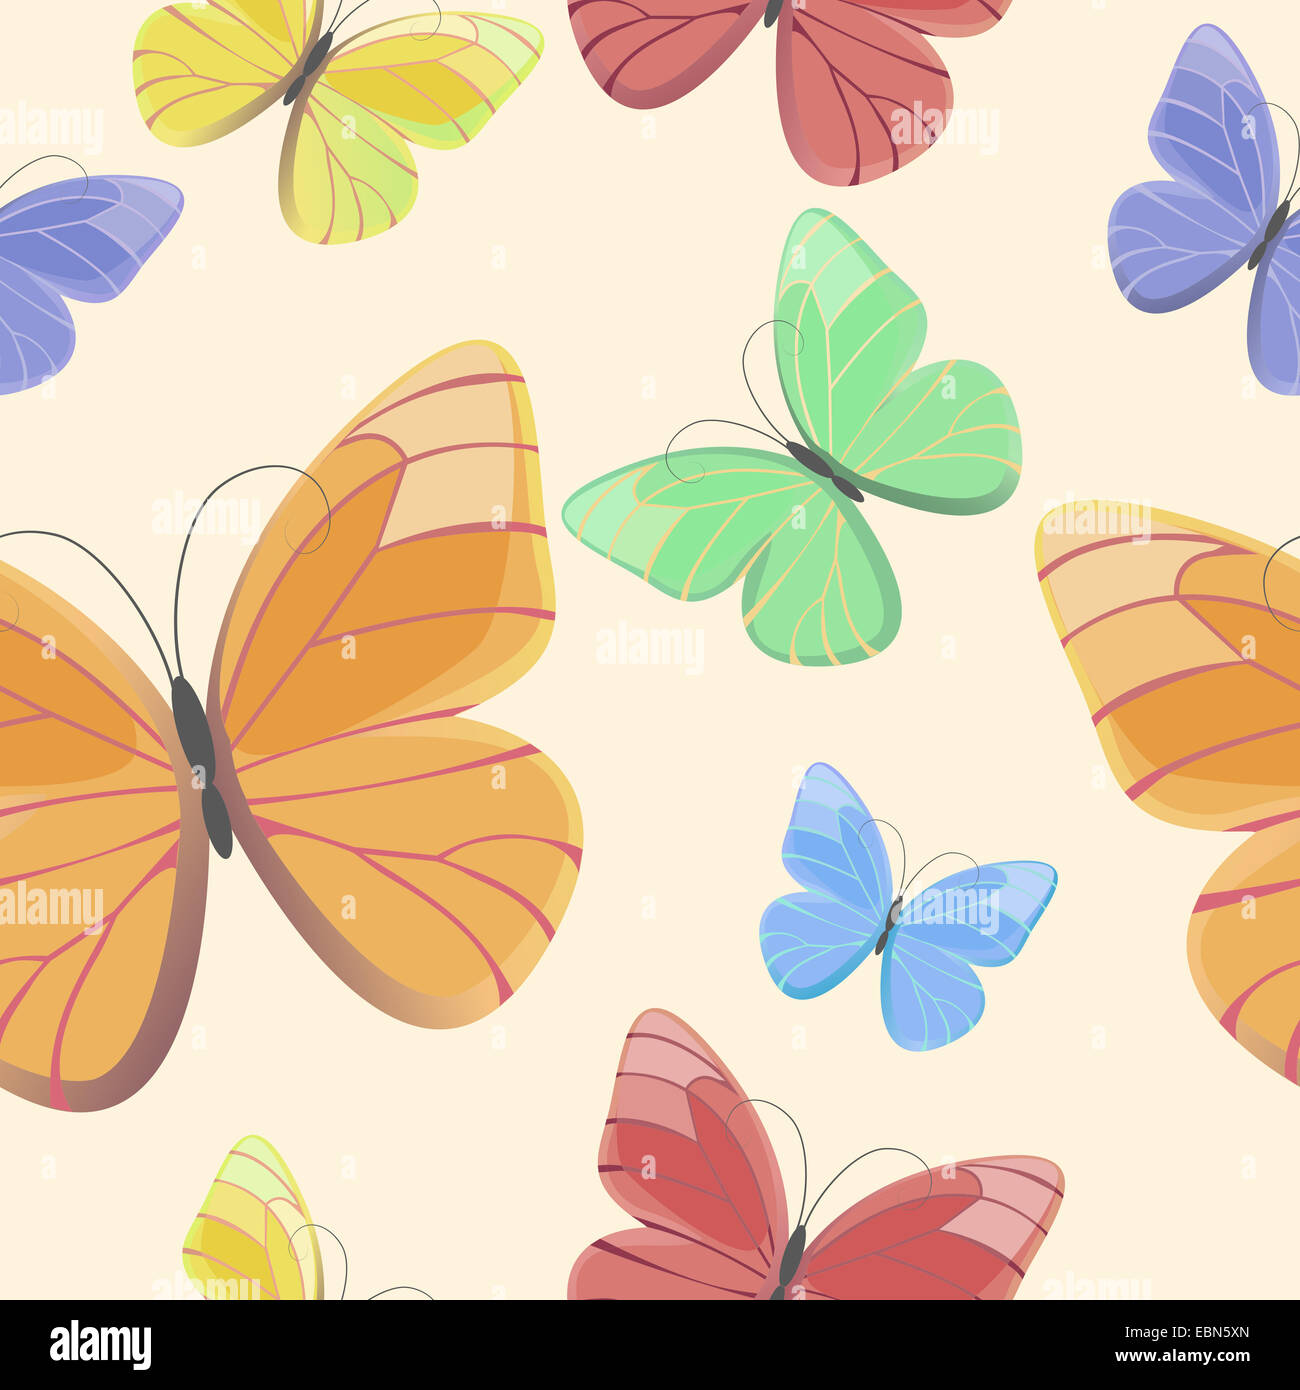 Seamless pattern with flying butterflies Stock Photo